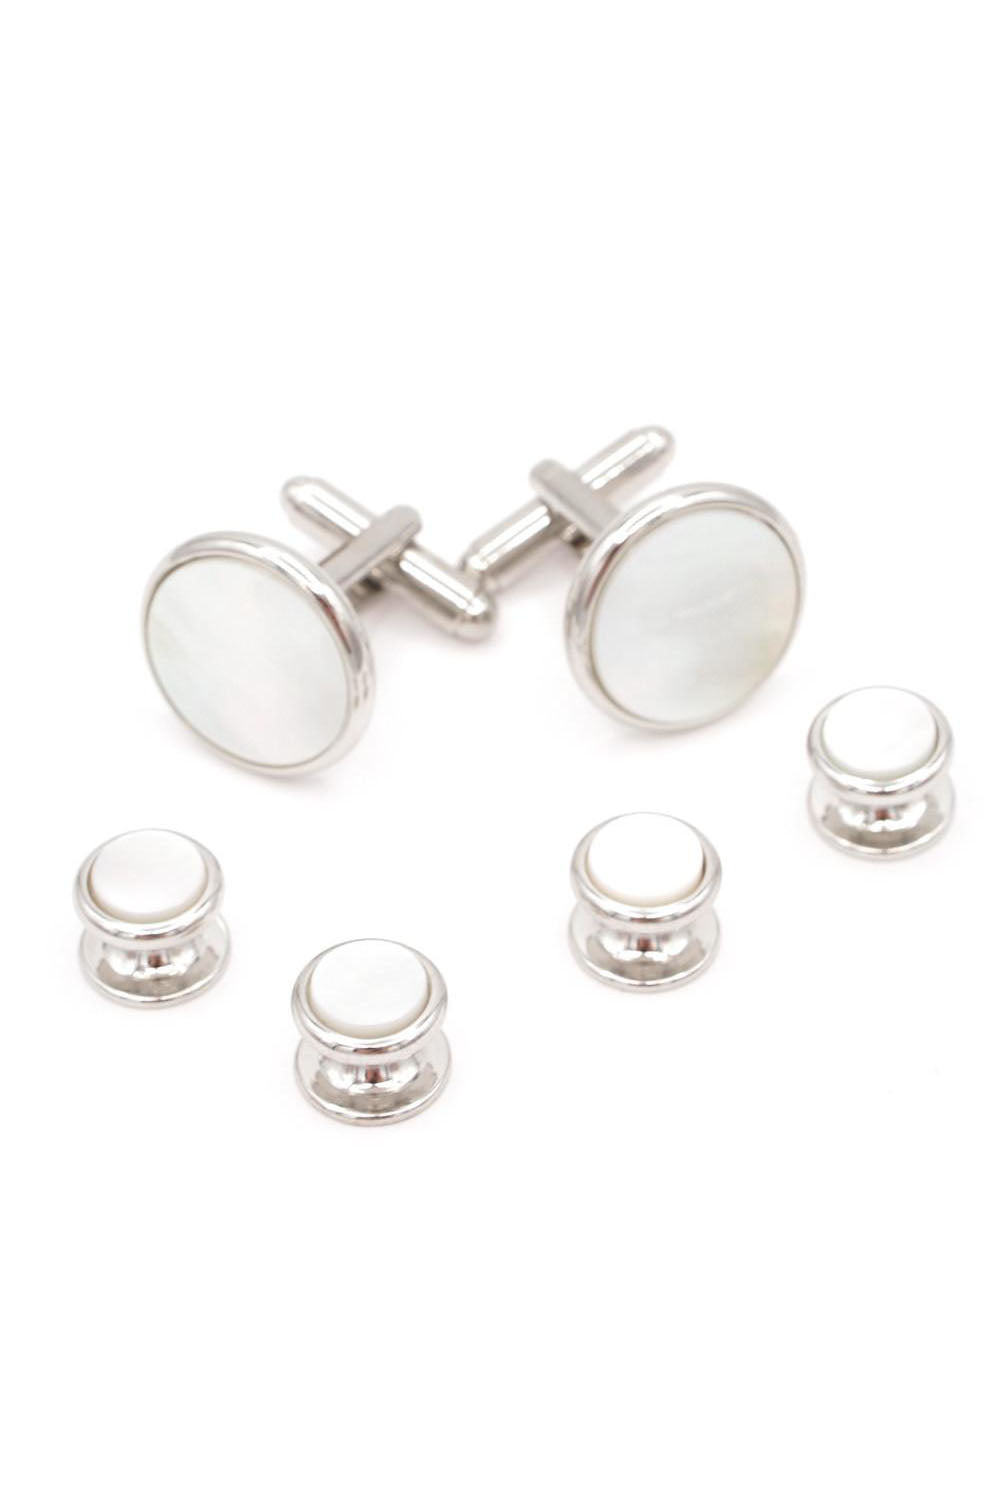 JJ Weston Smooth Edge Mother of Pearl Silver Studs and Cufflinks Set